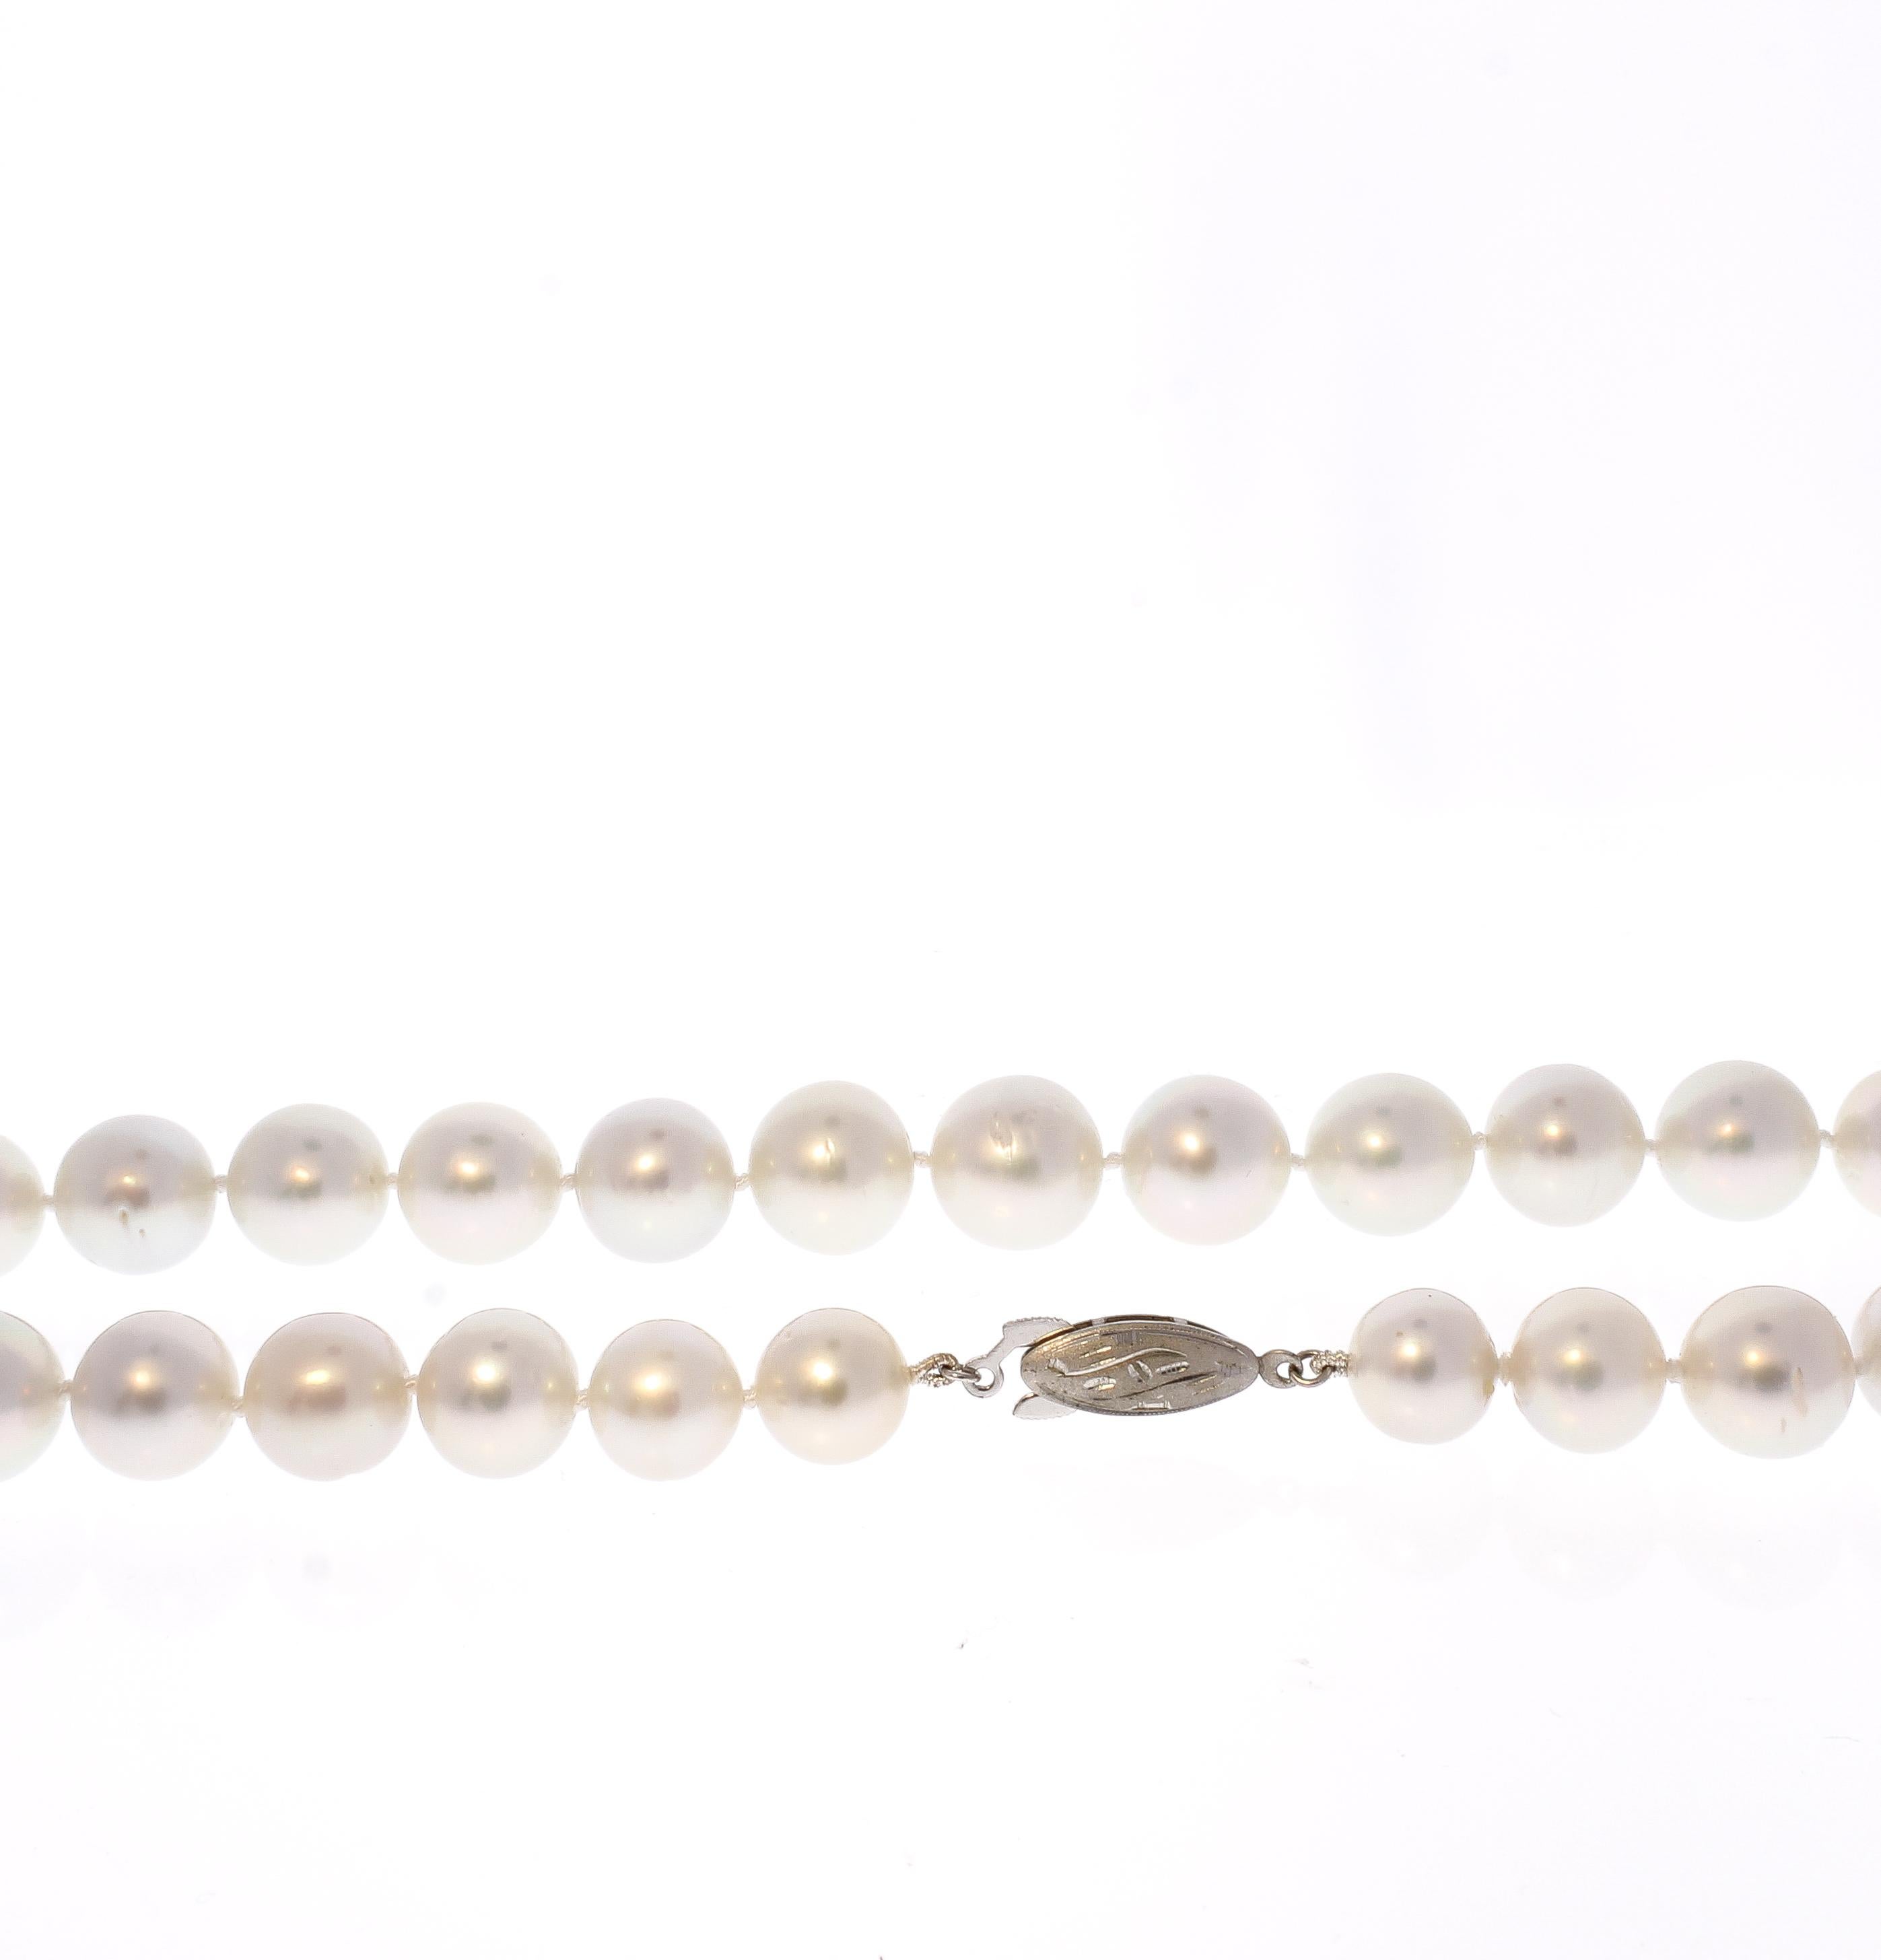 Round Cut White South Sea Pearl Necklace